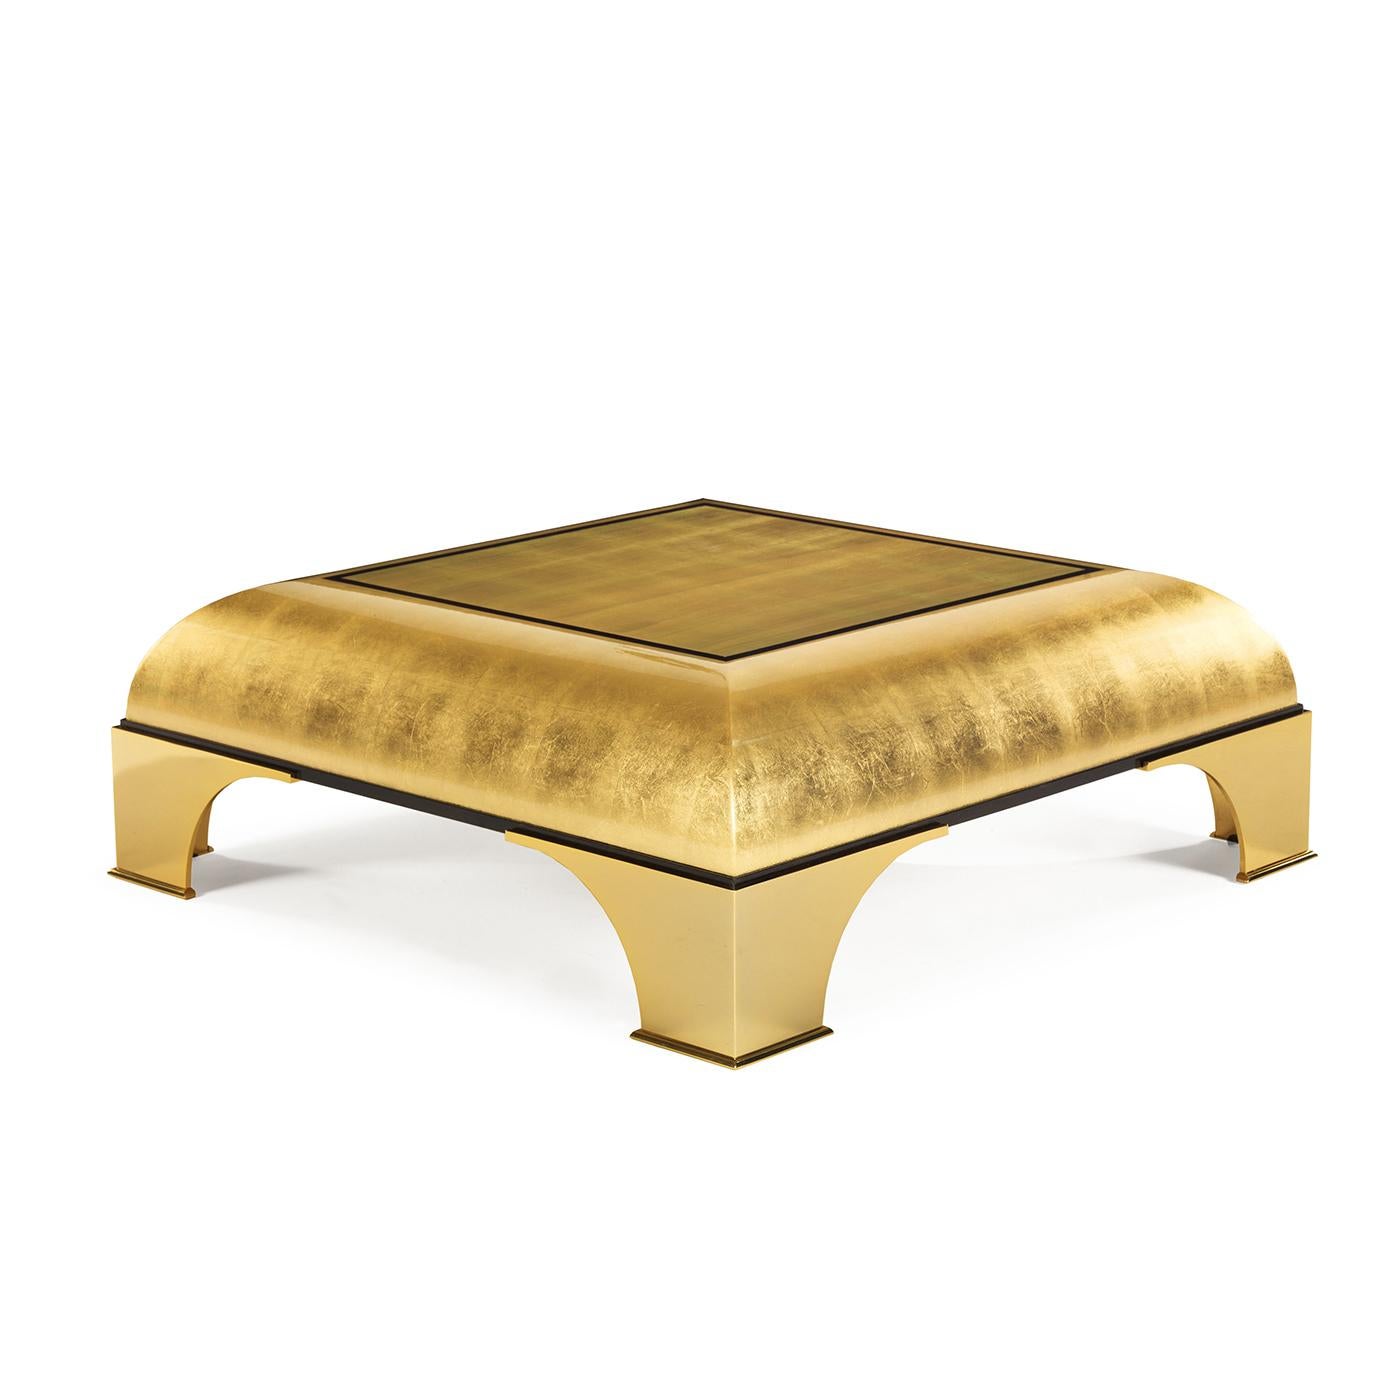 A magnificent piece that will elevate the look of a living room, creating a sumptuous ambiance and providing at the same time ample space to display collectibles and other objects, this coffee table will be a precious addition to any home. The four